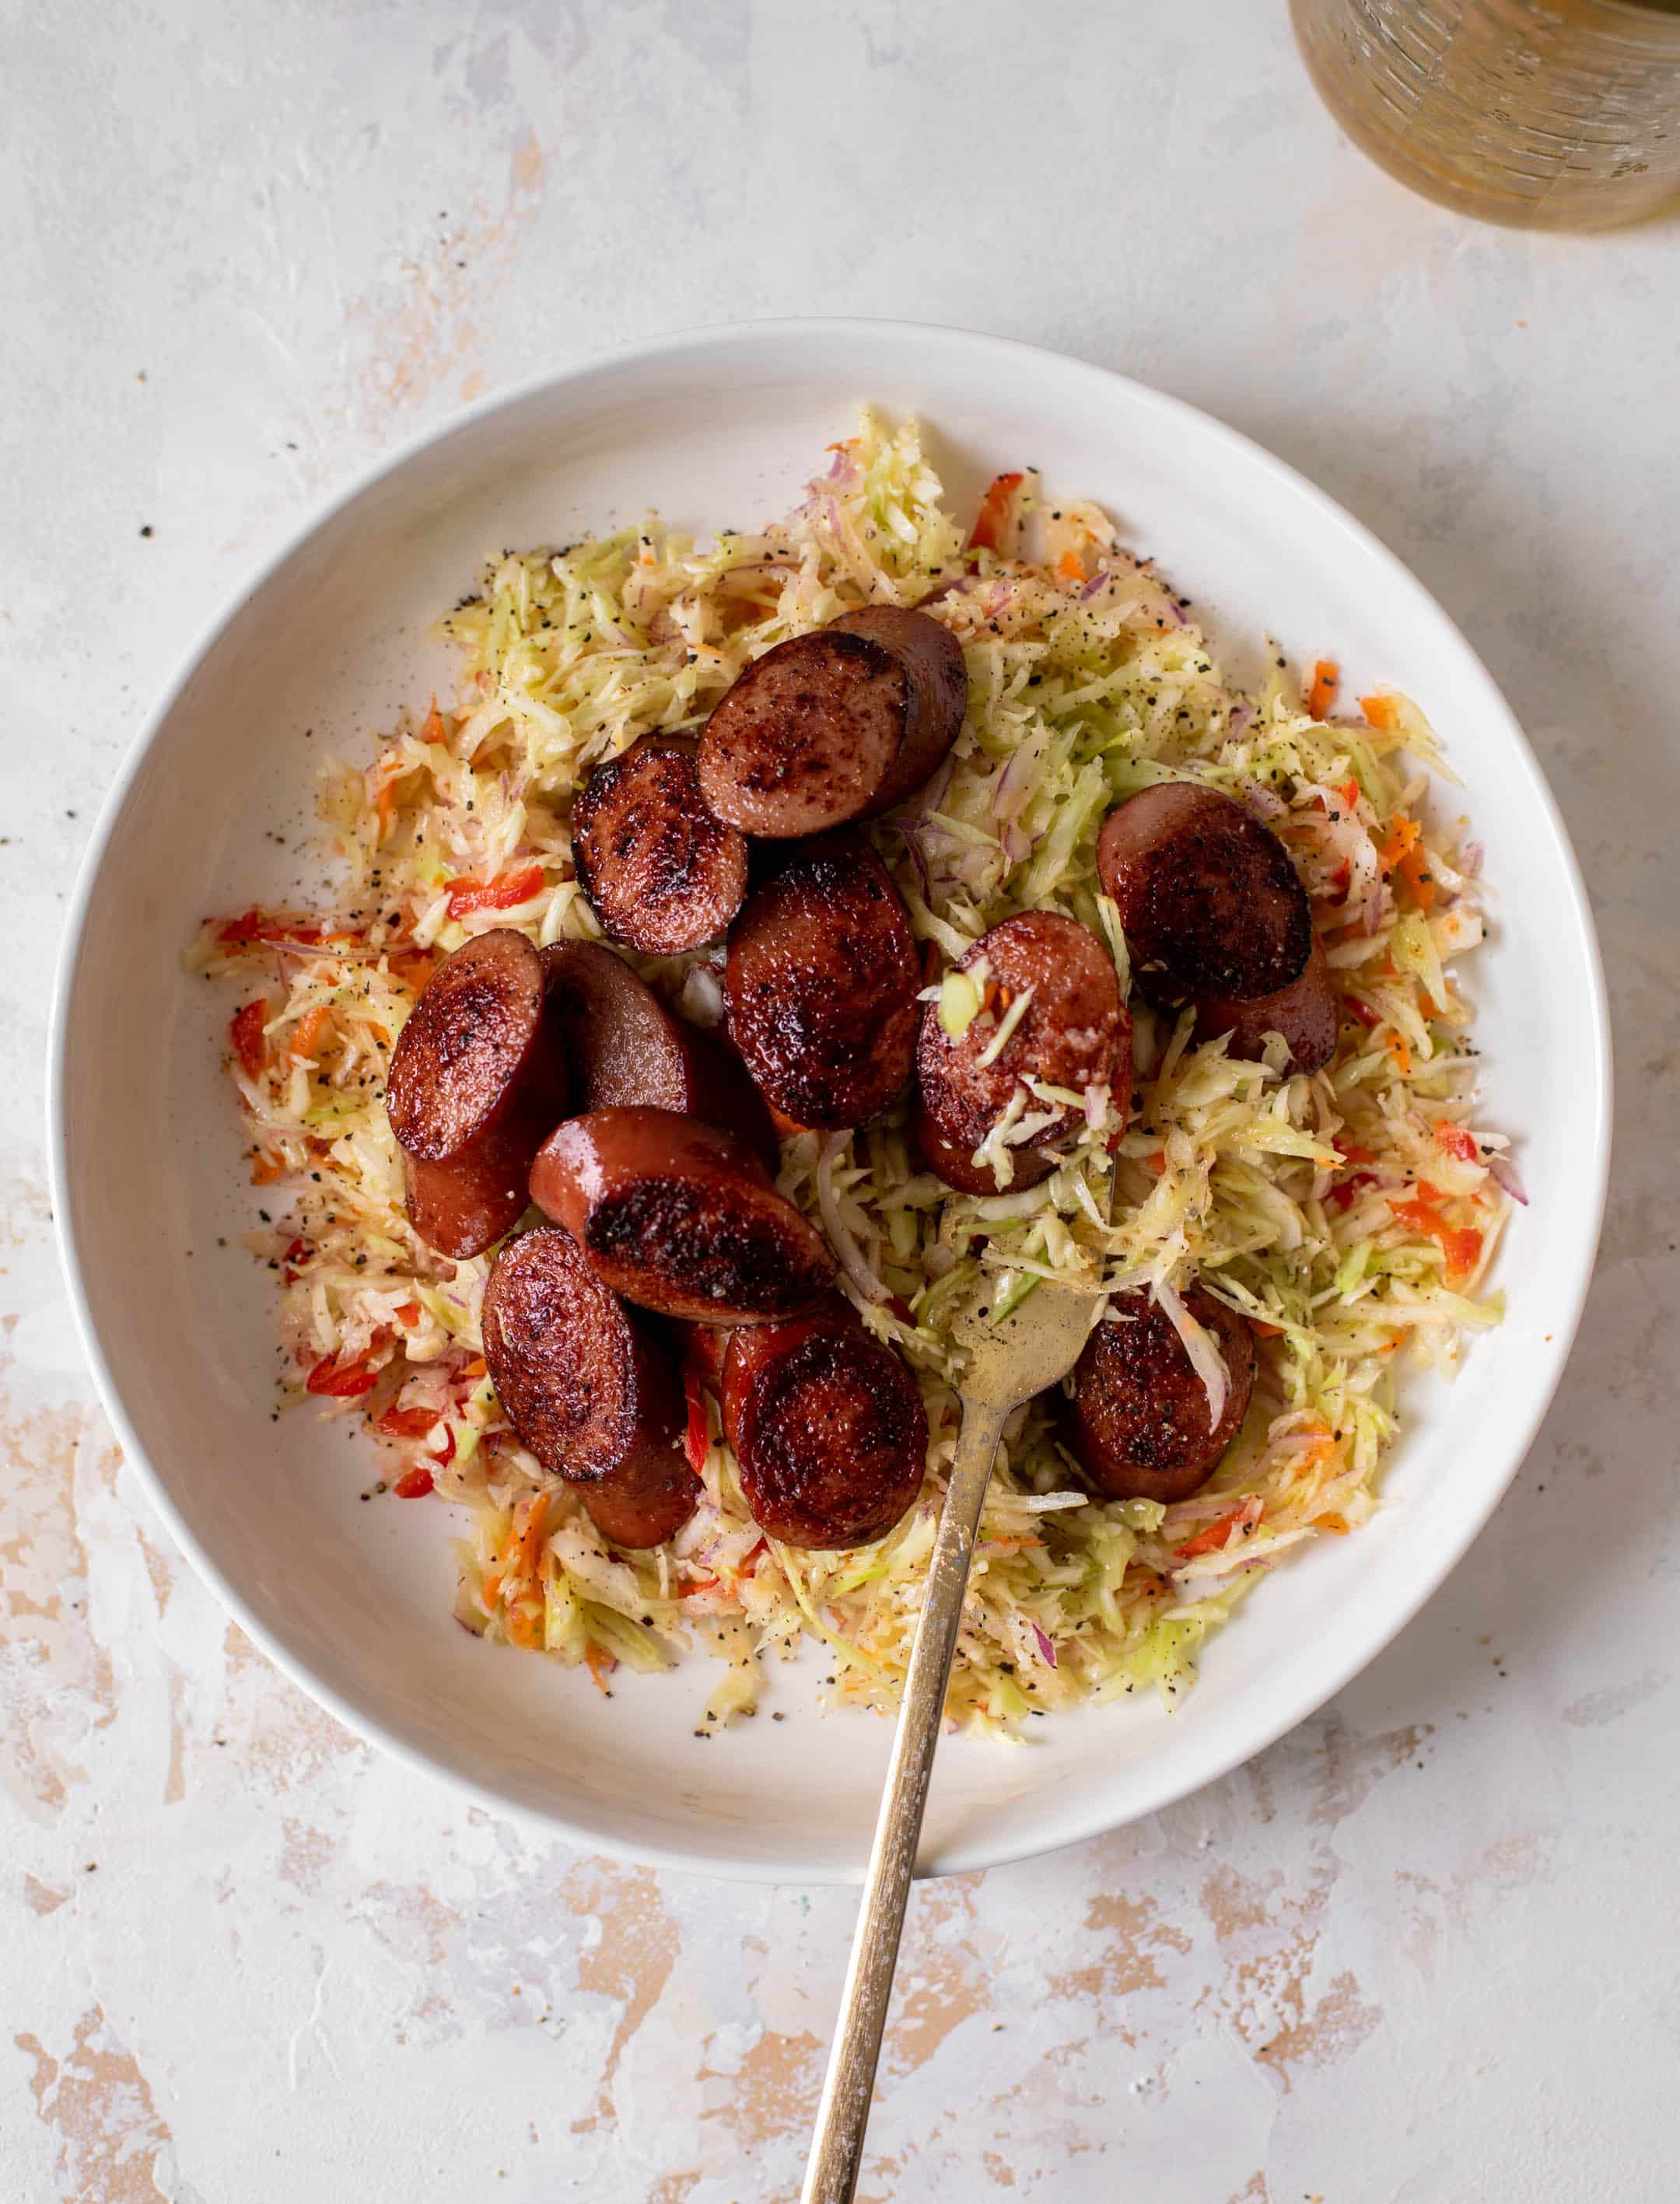 Smoked Sausage Salad with Shredded Cabbage.